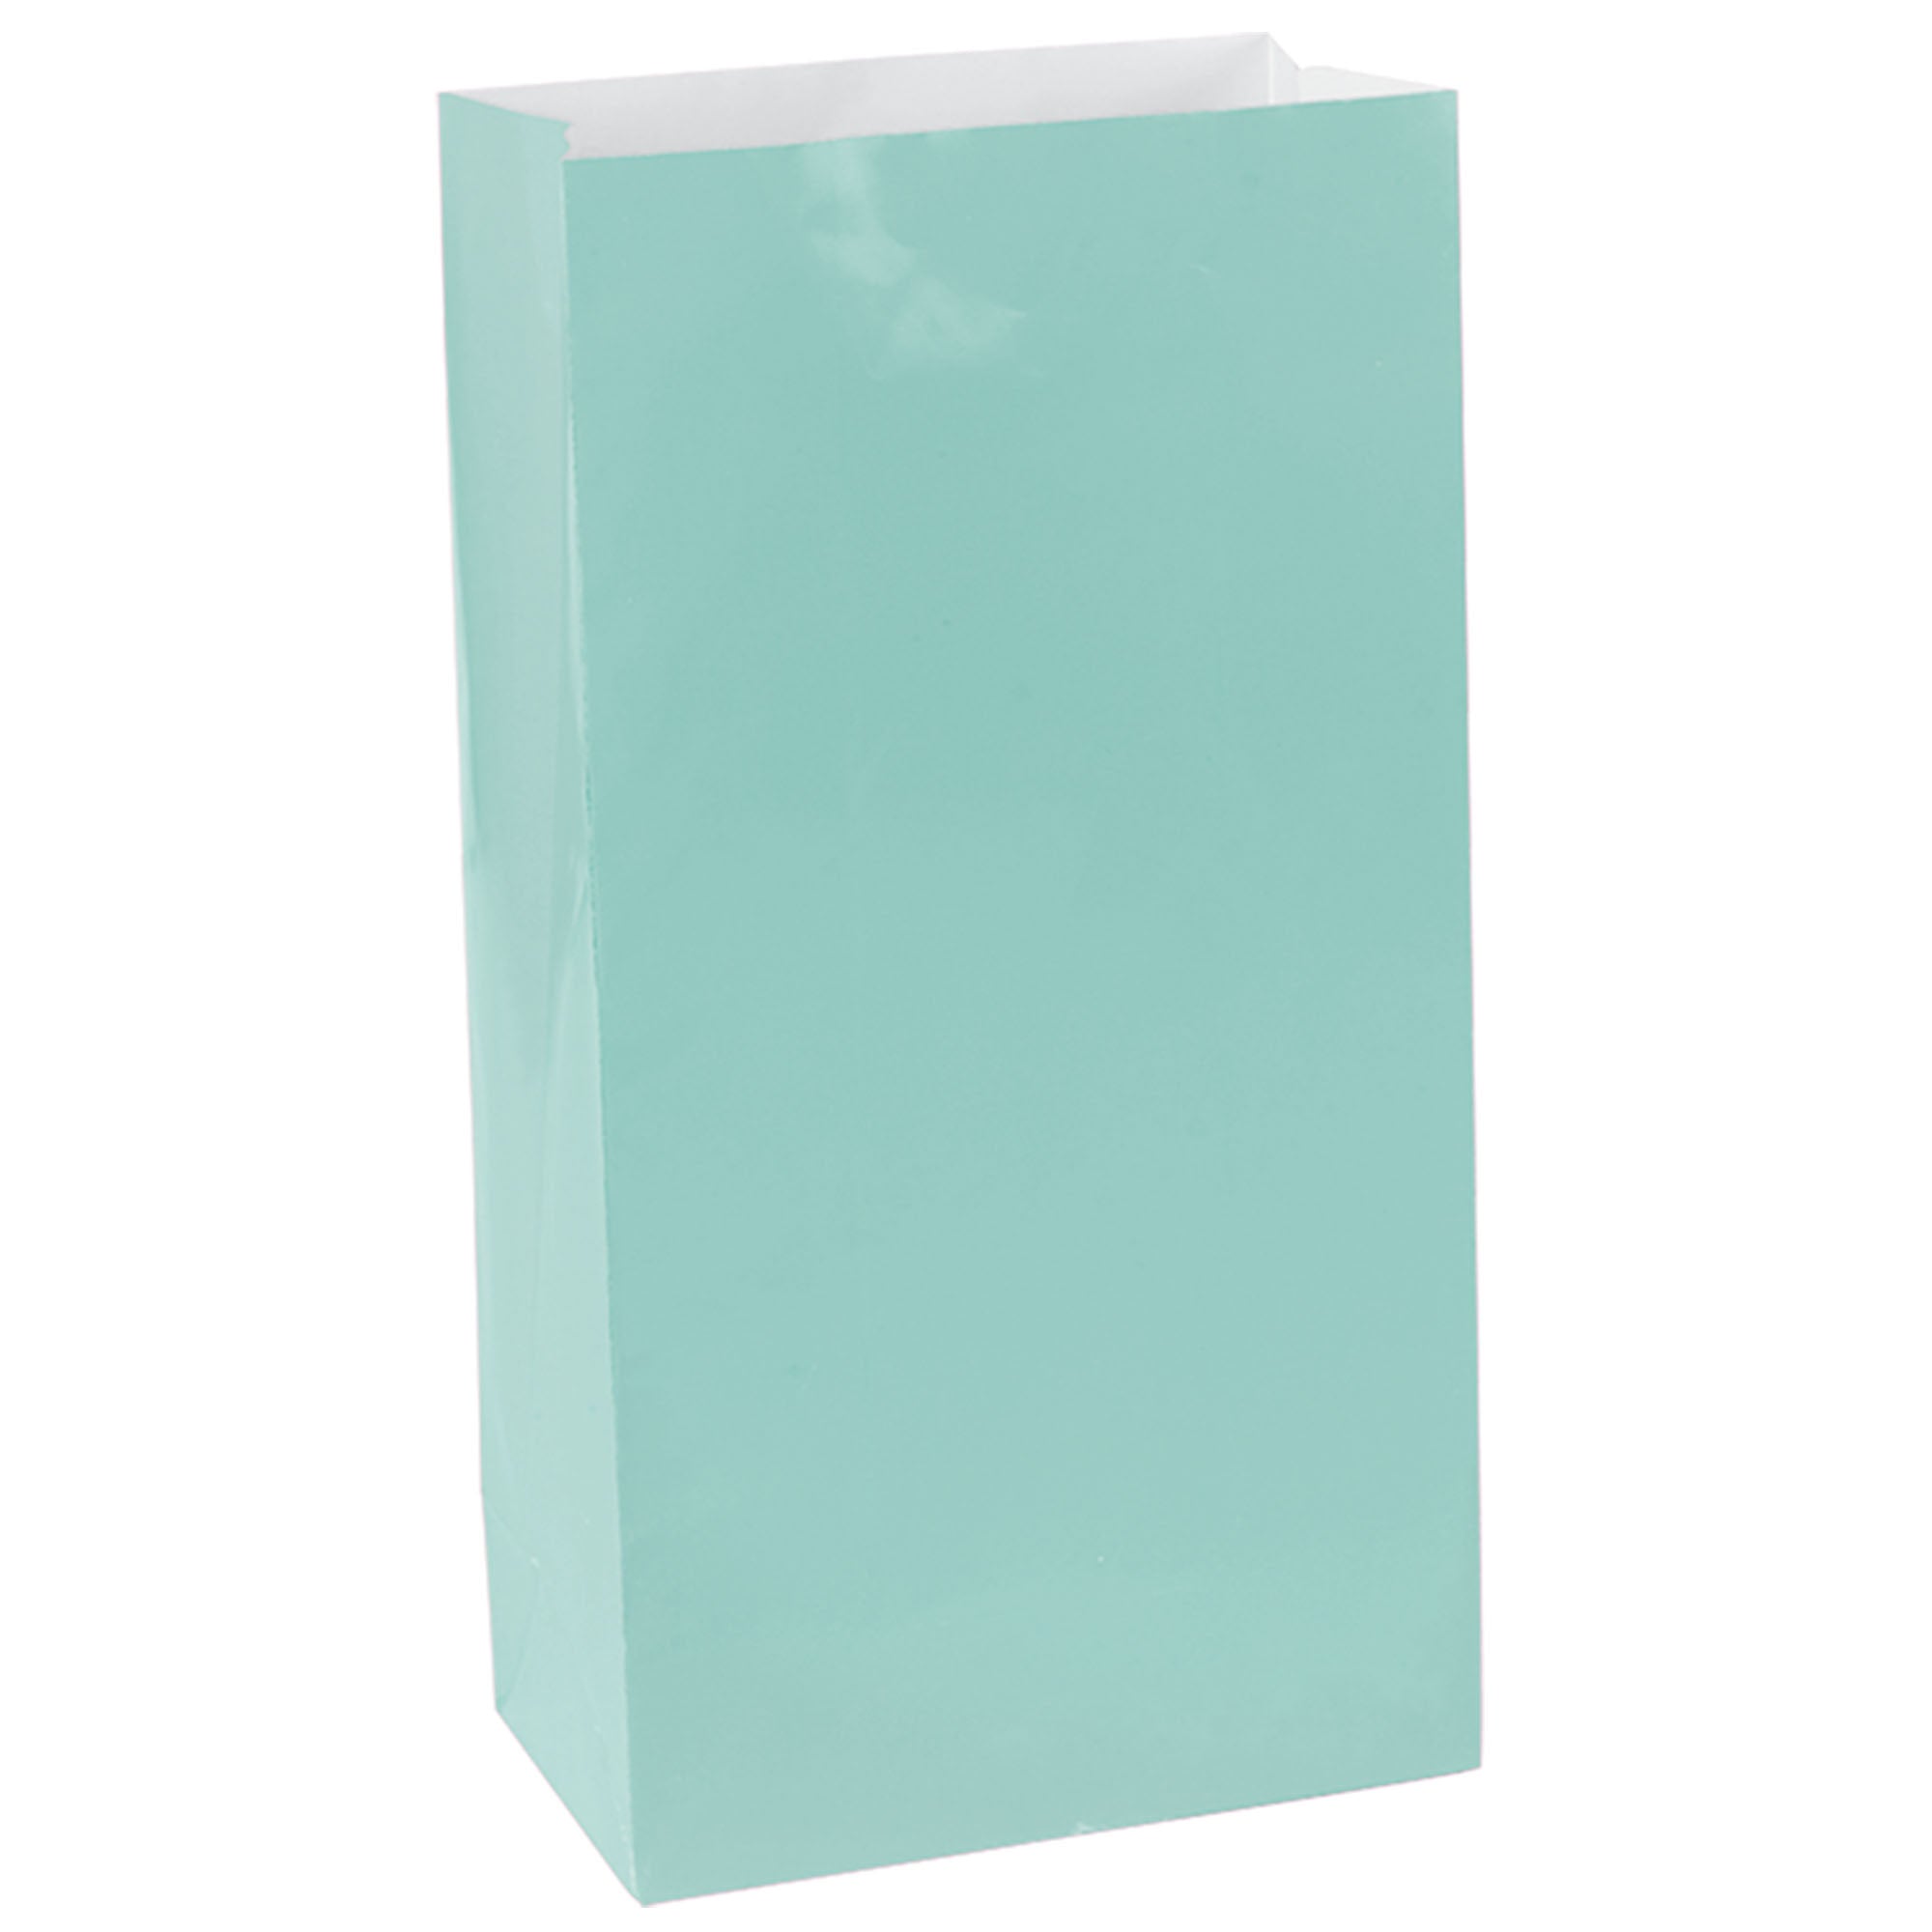 12 Mini Packaged Paper Bags  Robin Egg Blue  6.5x3x2in